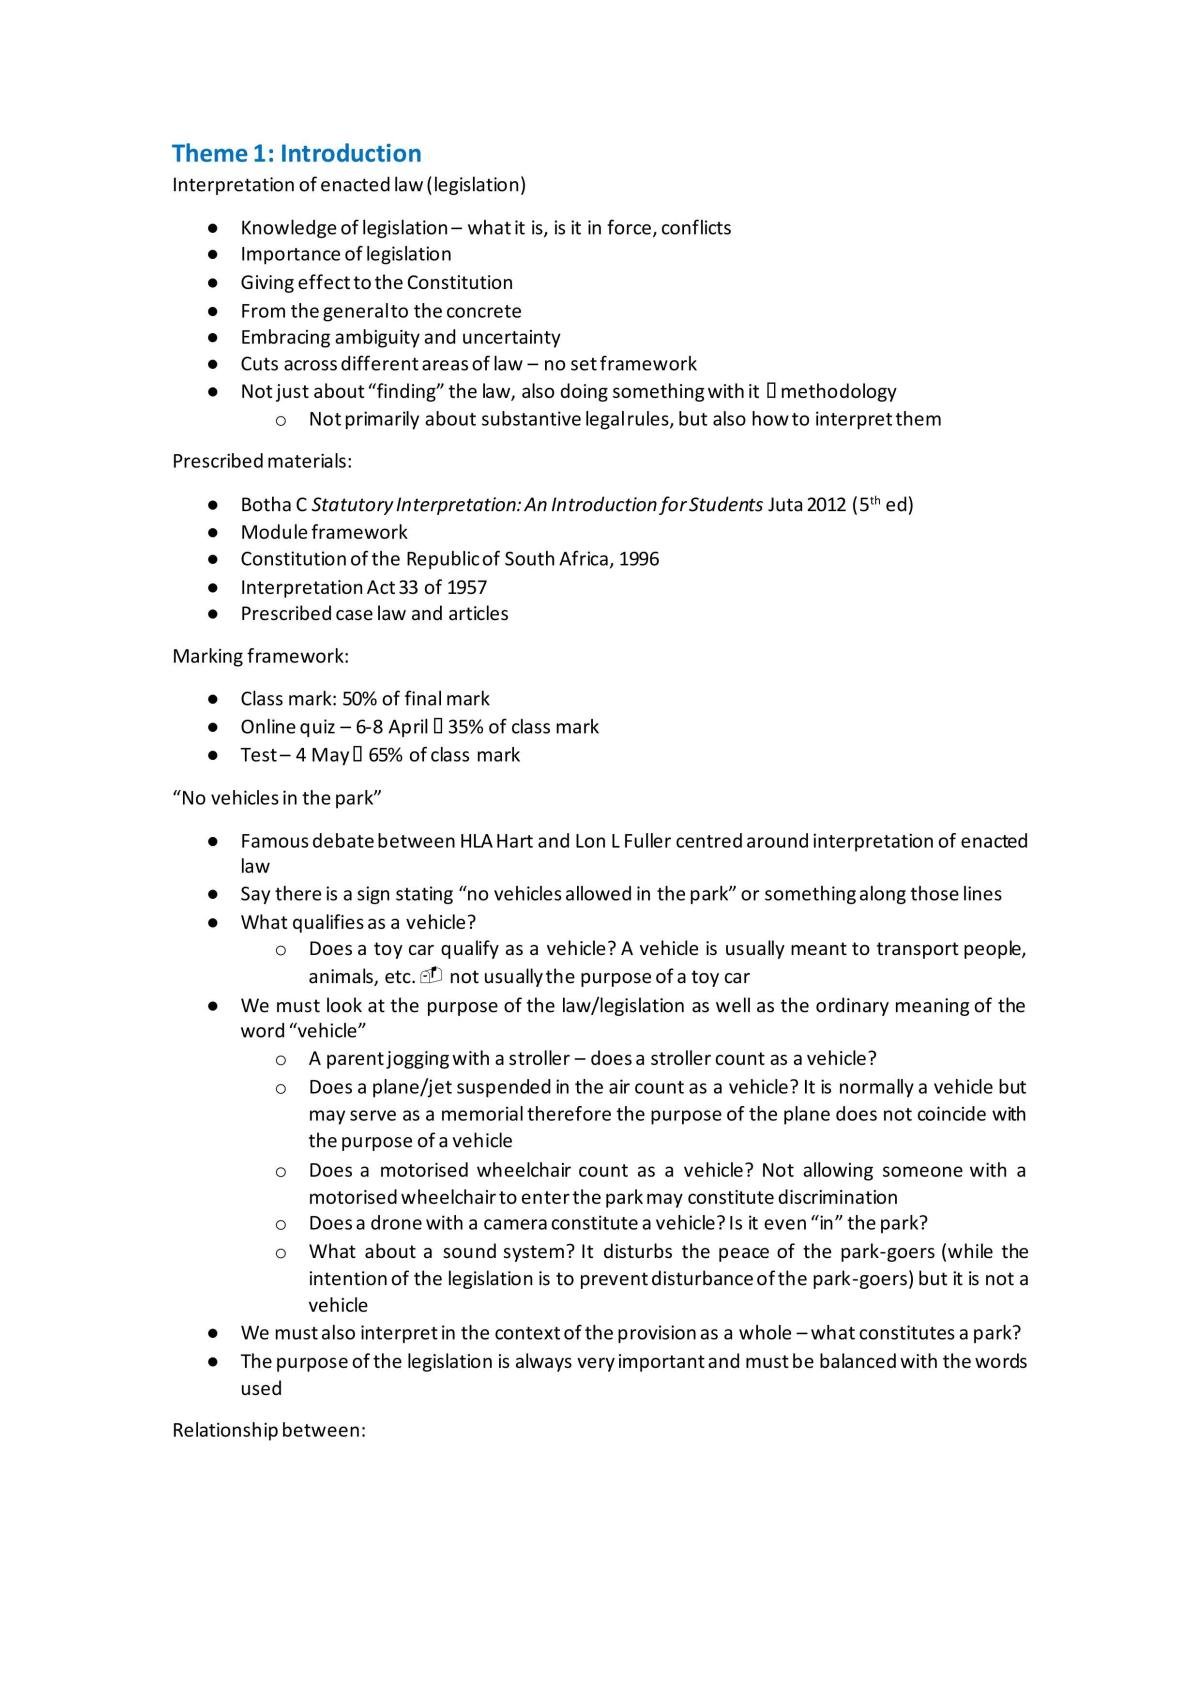 Interpretation of Enacted Law Course Summary for Topics 1 to 9 - Page 2